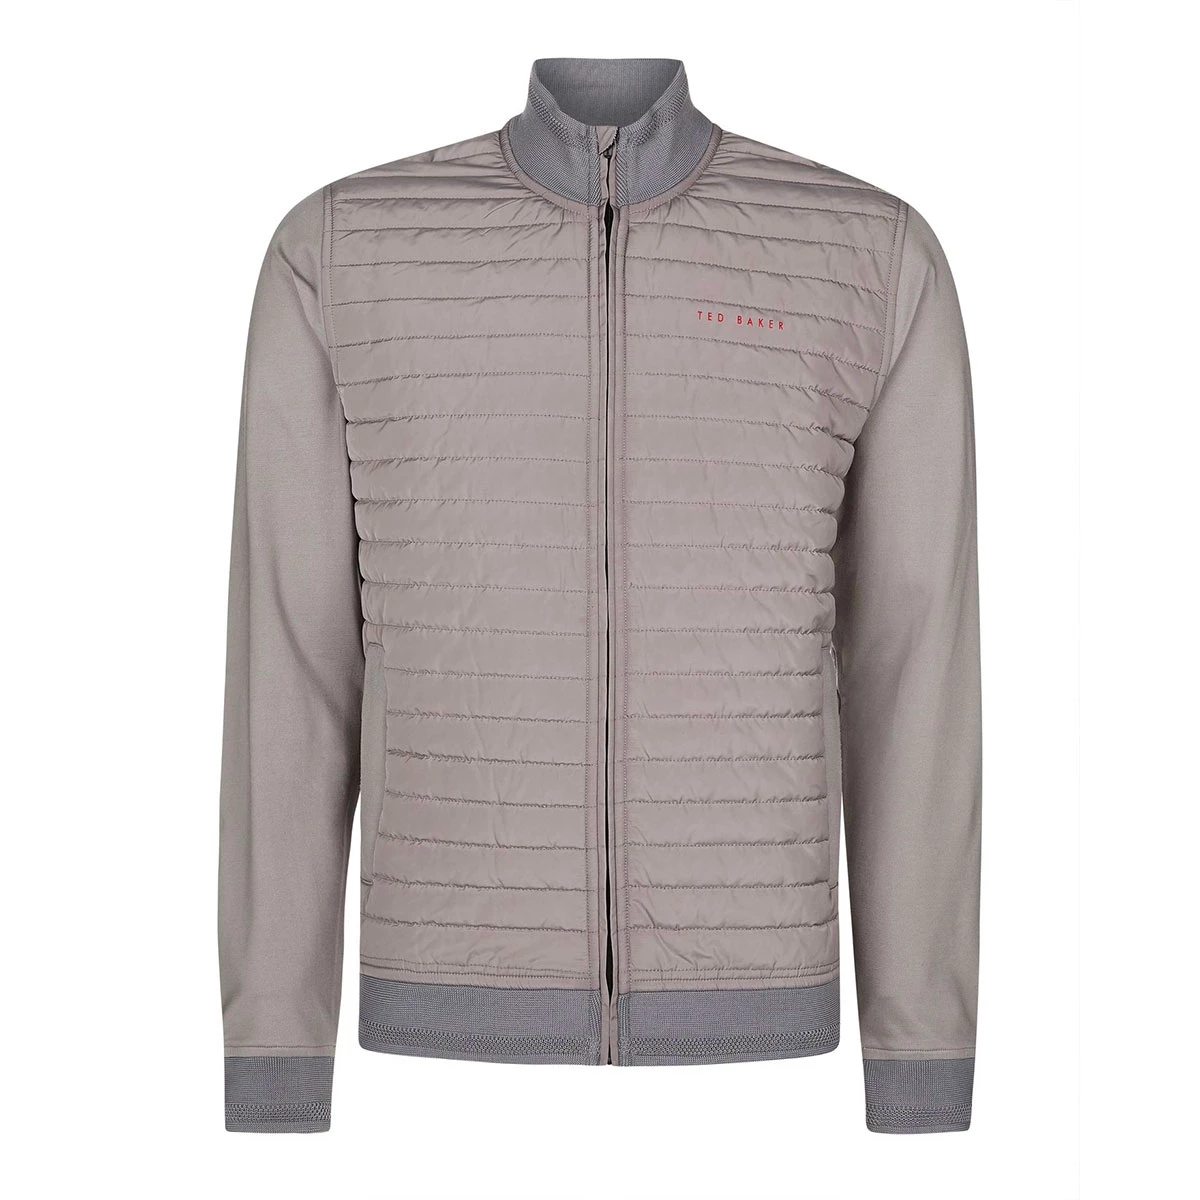 Ted Baker Player Funnel Neck Jacket in Grey #159587 category image